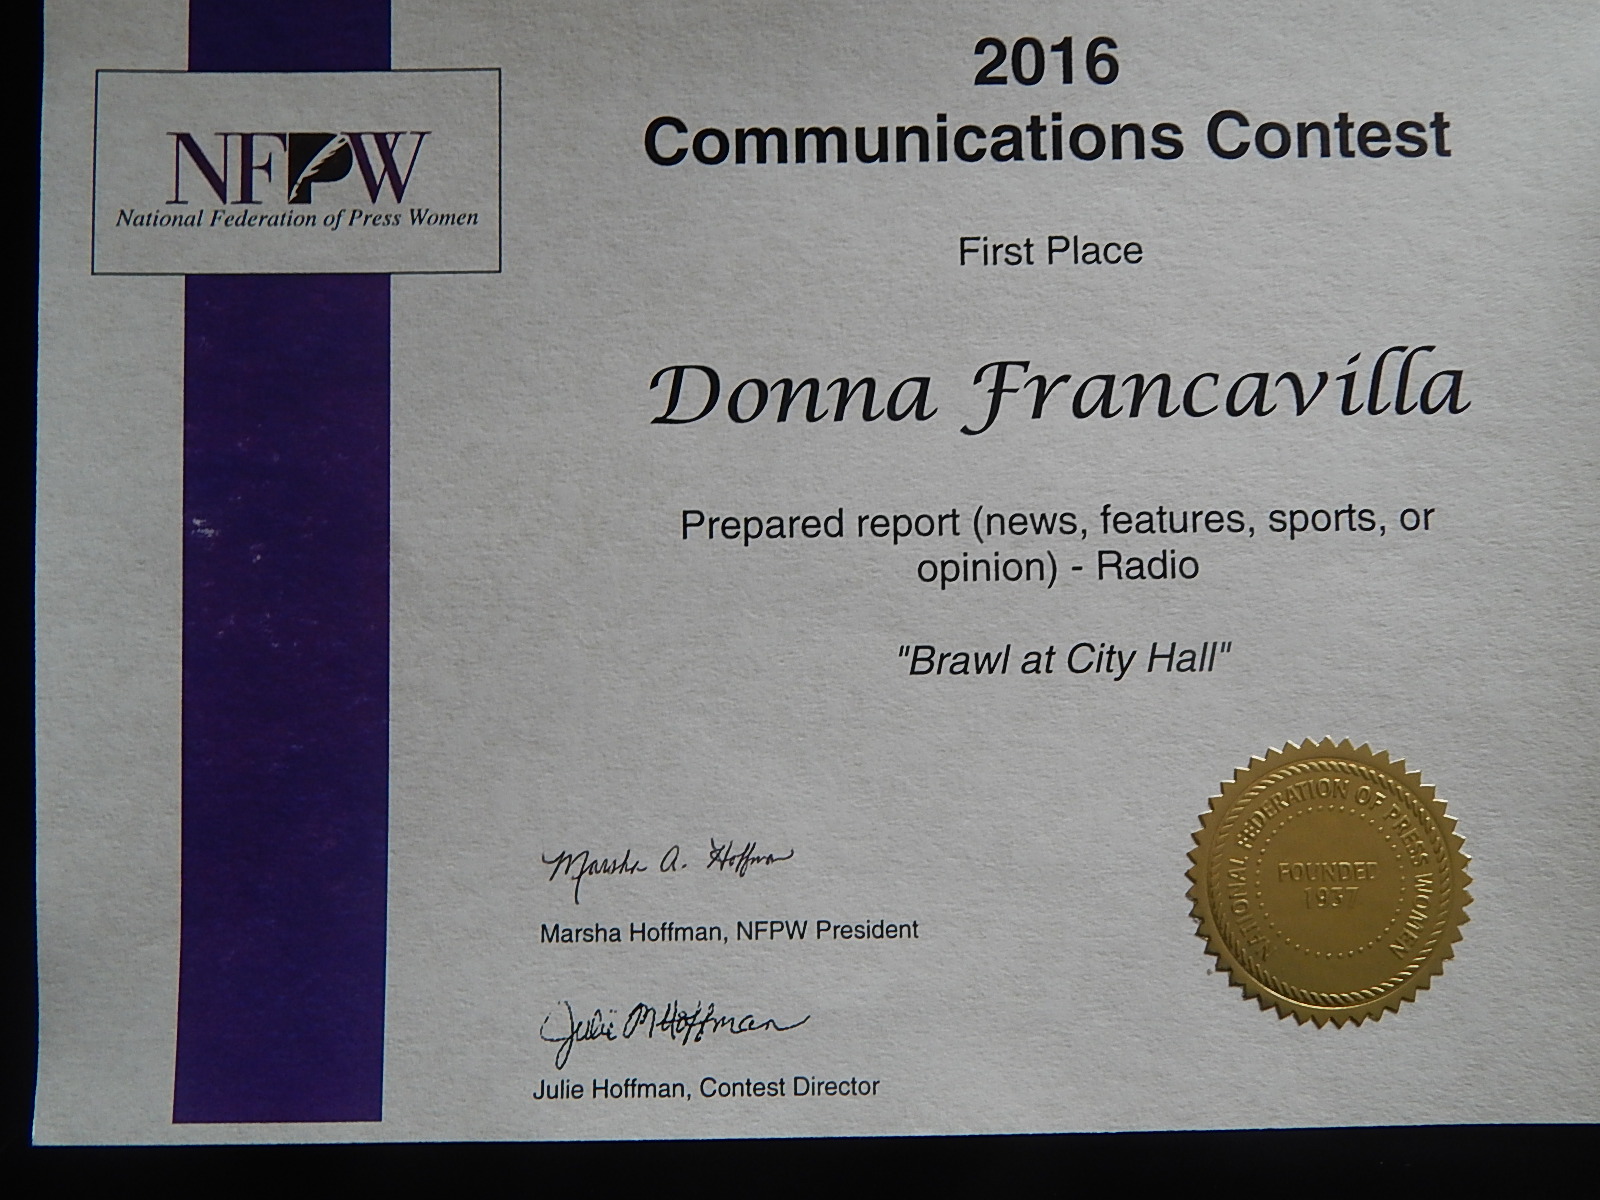 2016 National Federation of Press Women - National Award - First place presented to Donna Francavilla for Prepared Report - Radio "Brawl at City Hall"